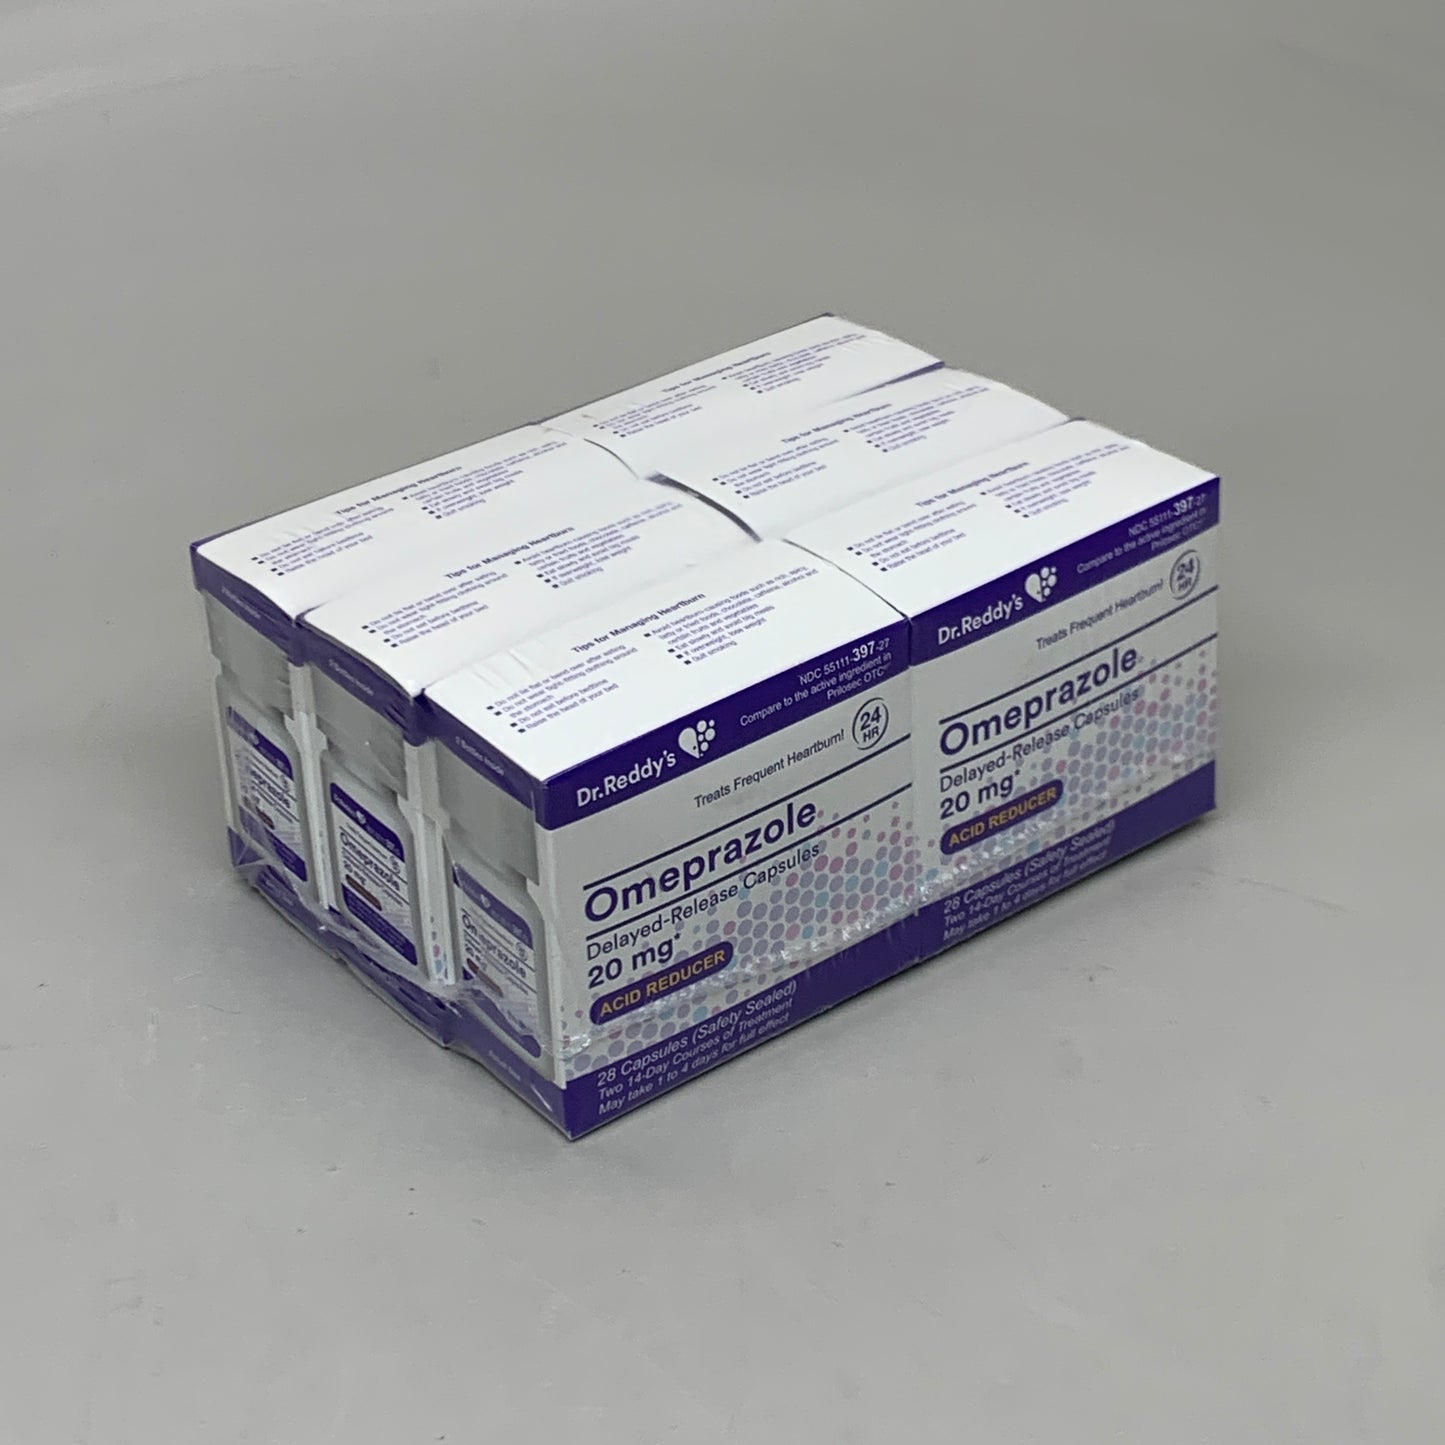 ZA@ DR.REDDY'S 6 BOXES! (13 Bottles) Omeprazole 20 mg Acid Reducer 168 CAPSULES (AS-IS)